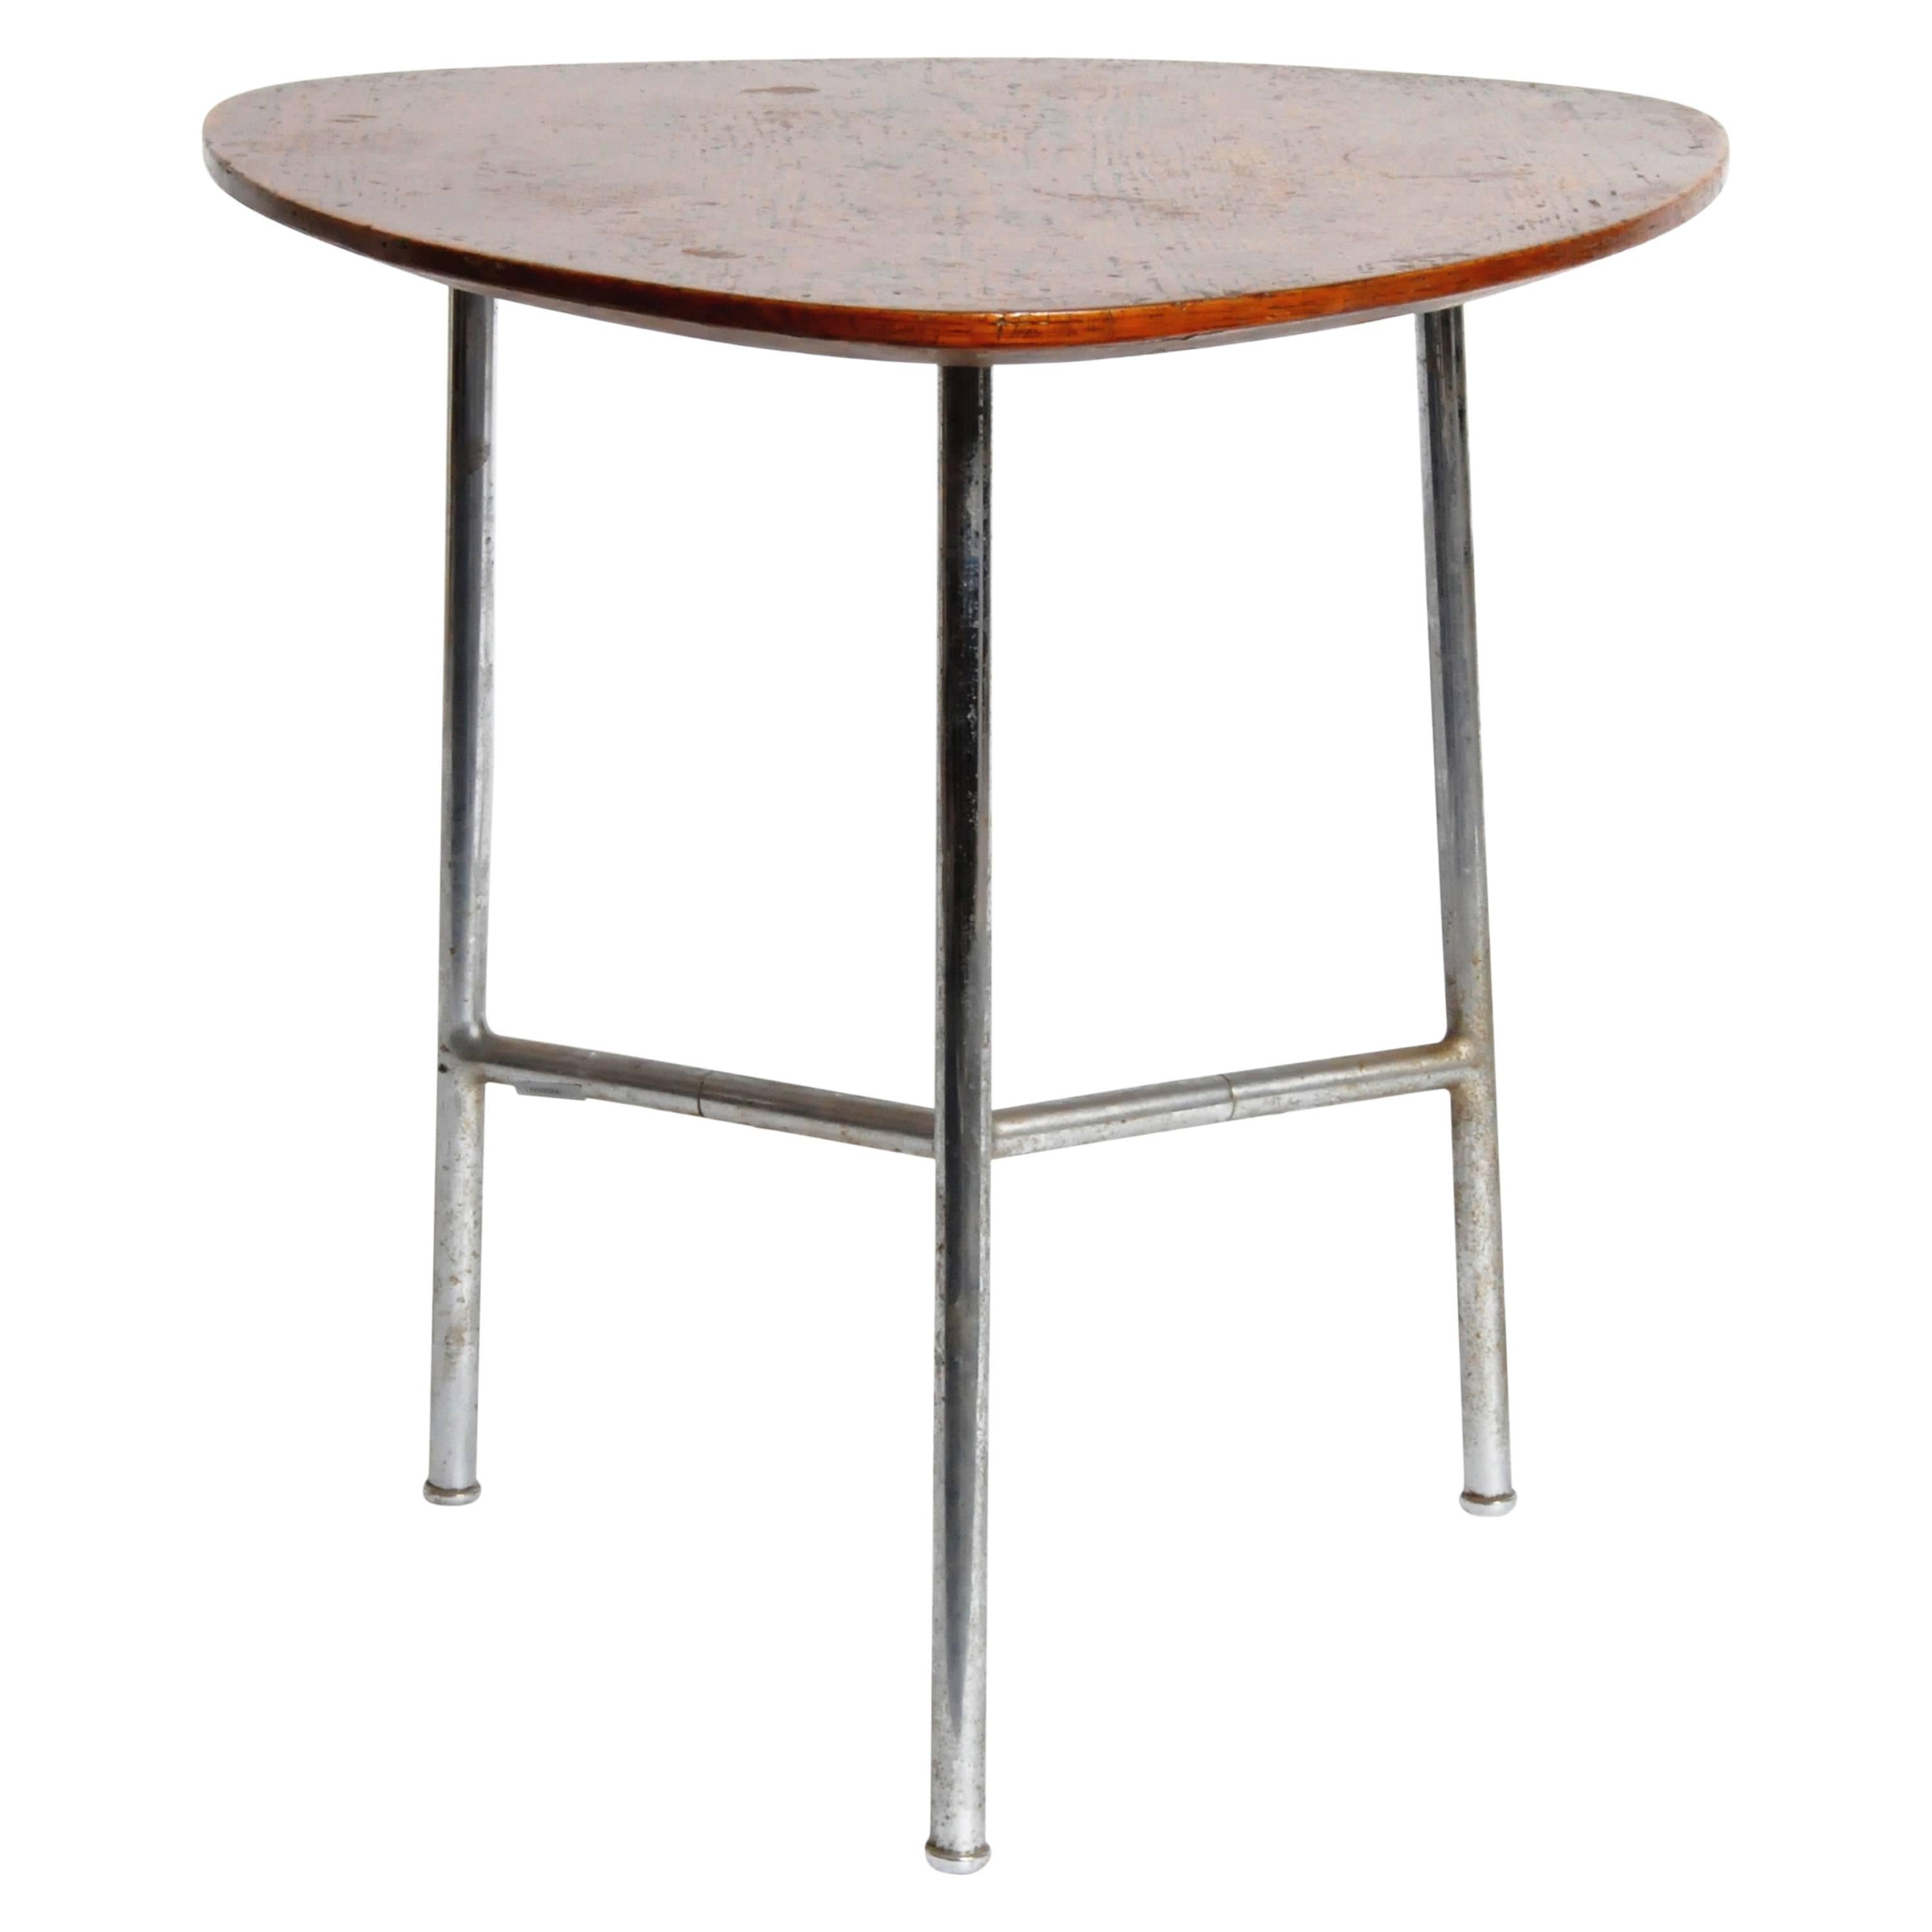 Hungarian Tables with Metal Legs